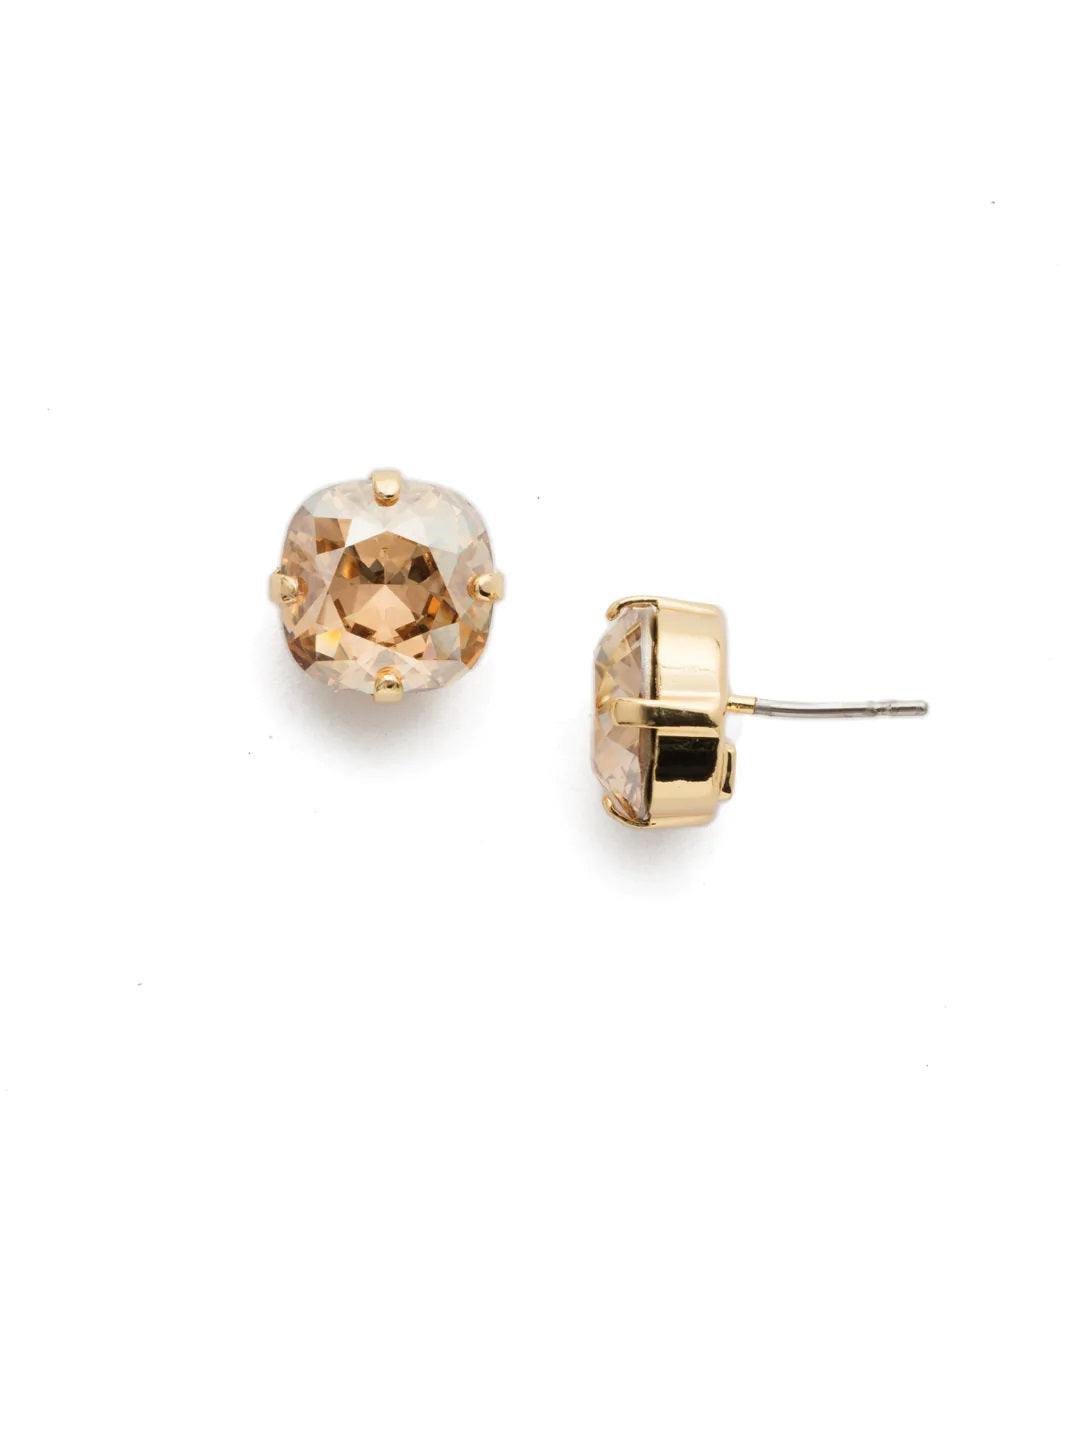 Halcyon Stud Earrings (Bright Gold Finish)